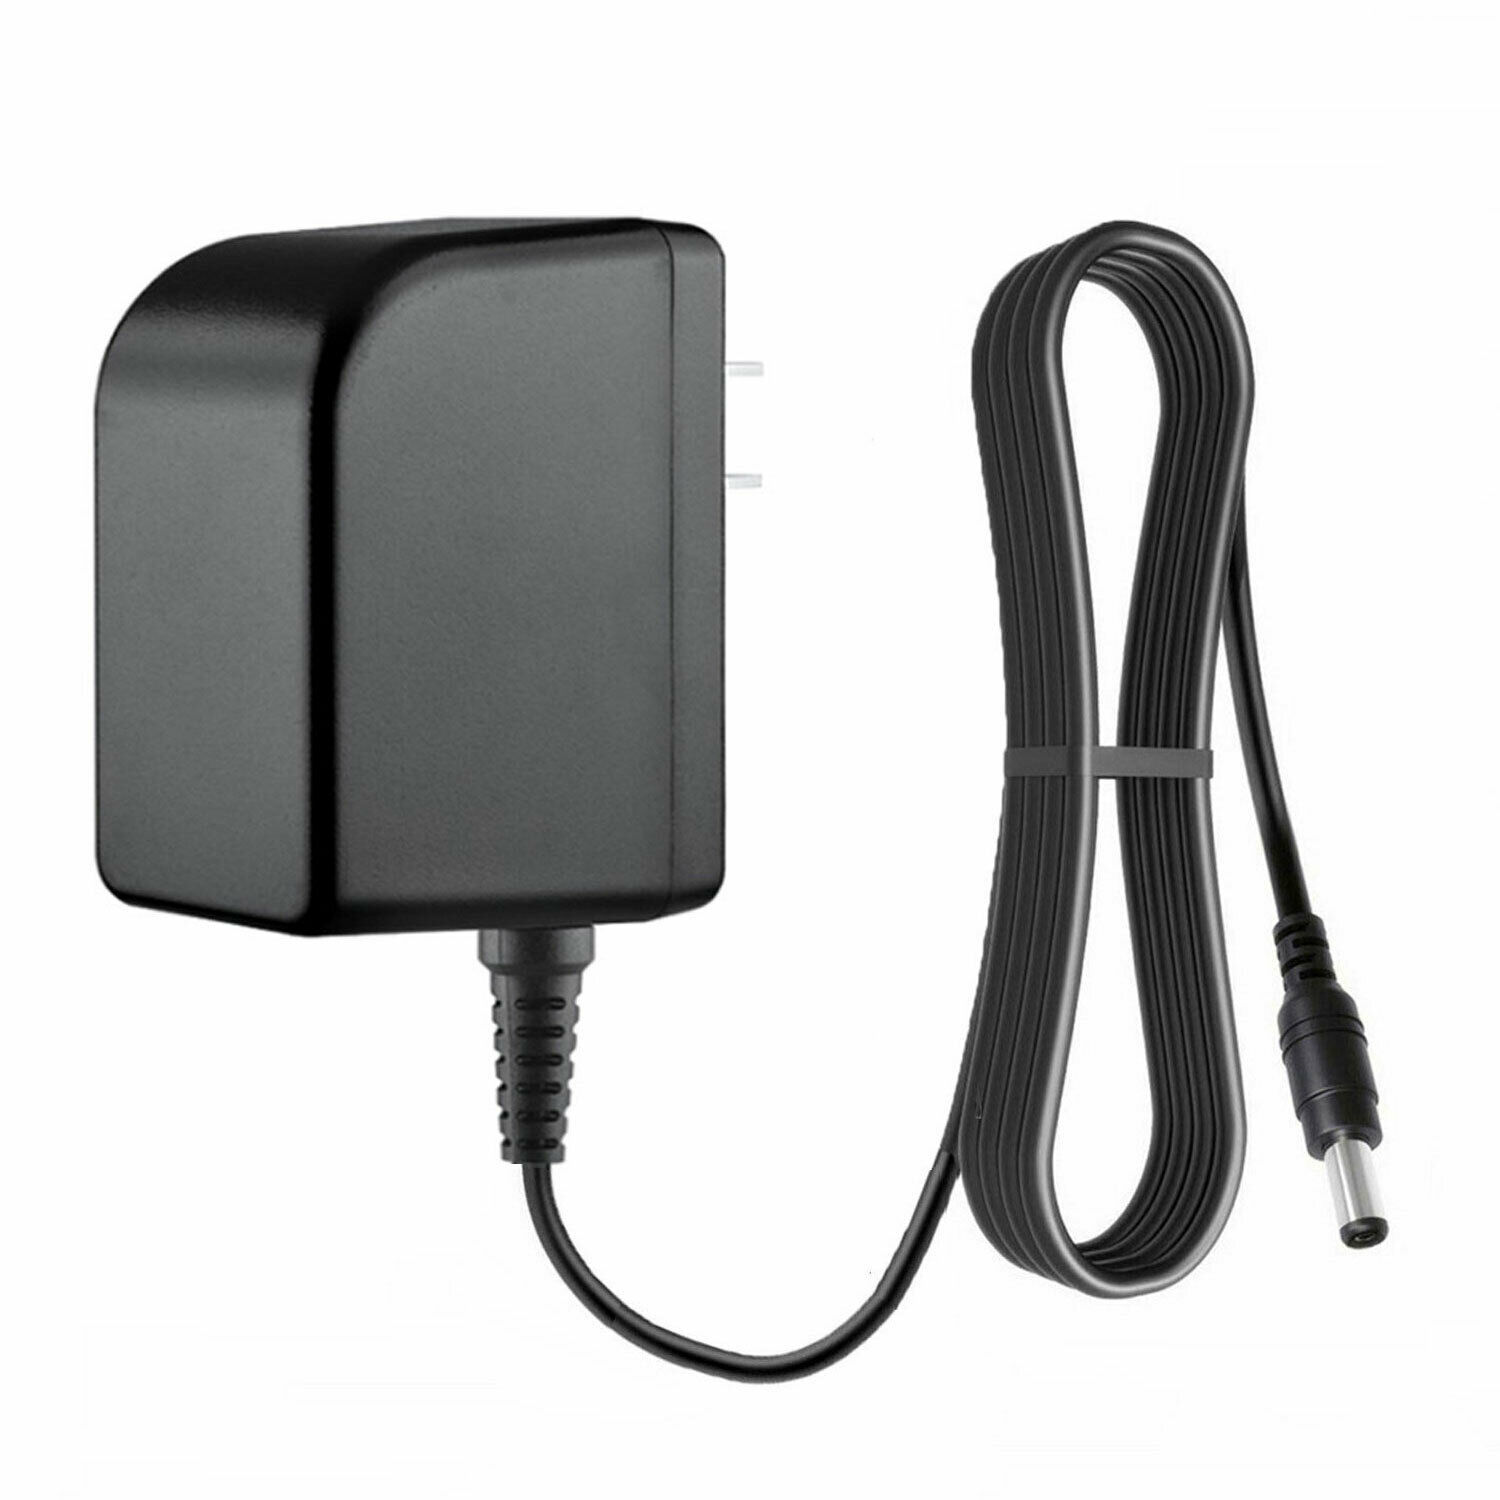 3A AC Wall Charger Adapter Power for Epik Teqnio ELL1201T ELL1401BK laptop Connecter Size: Round tip Cable Length: 6.6f - Click Image to Close